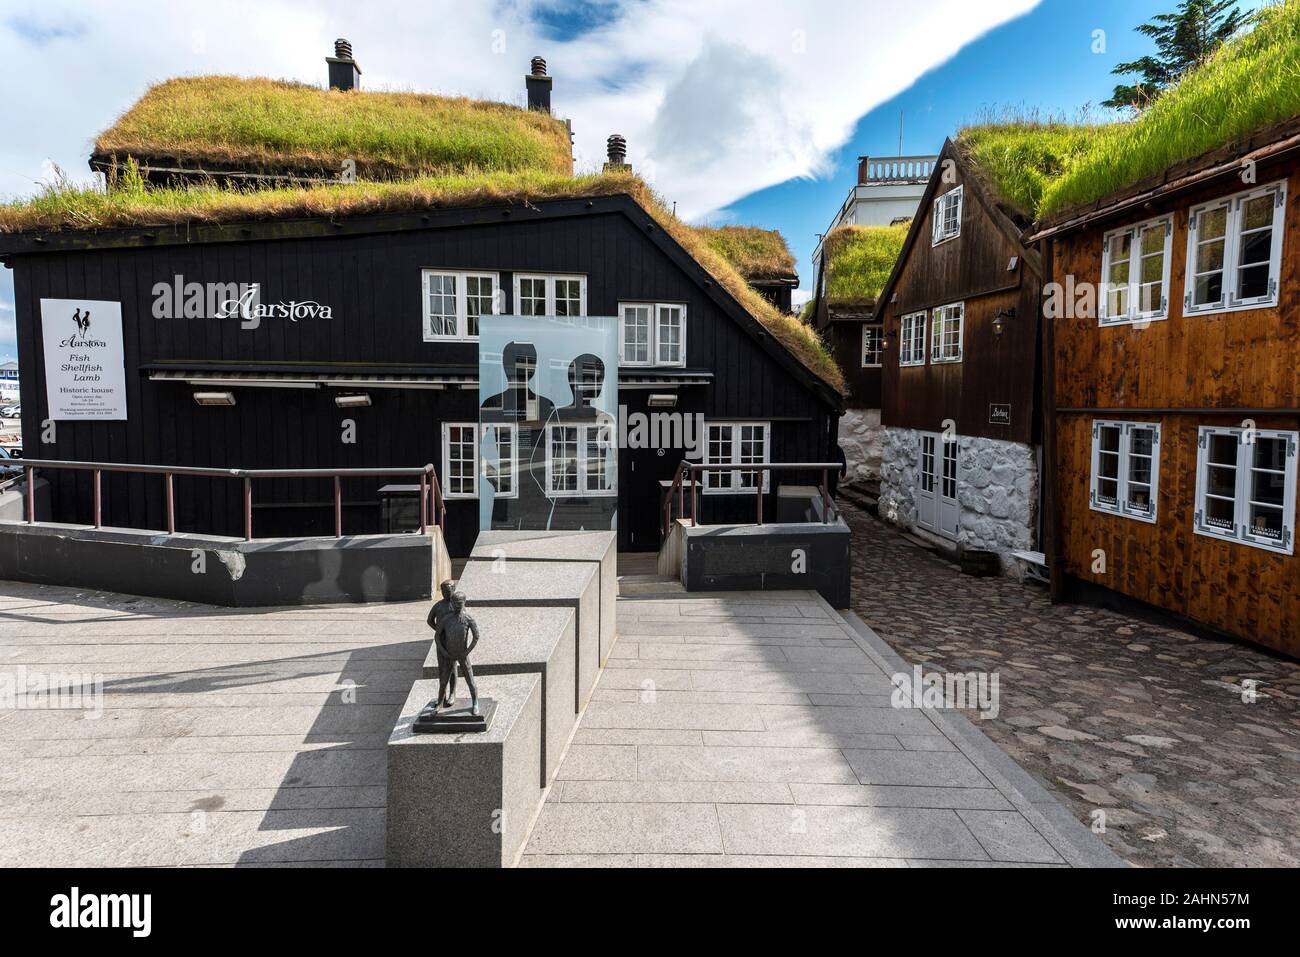 Torshavn, Faroe – July 11, 2018  Aarvegur Street view in harbor quartiers of Torshavn city, modern sculptures in the middle of the old traditional bui Stock Photo